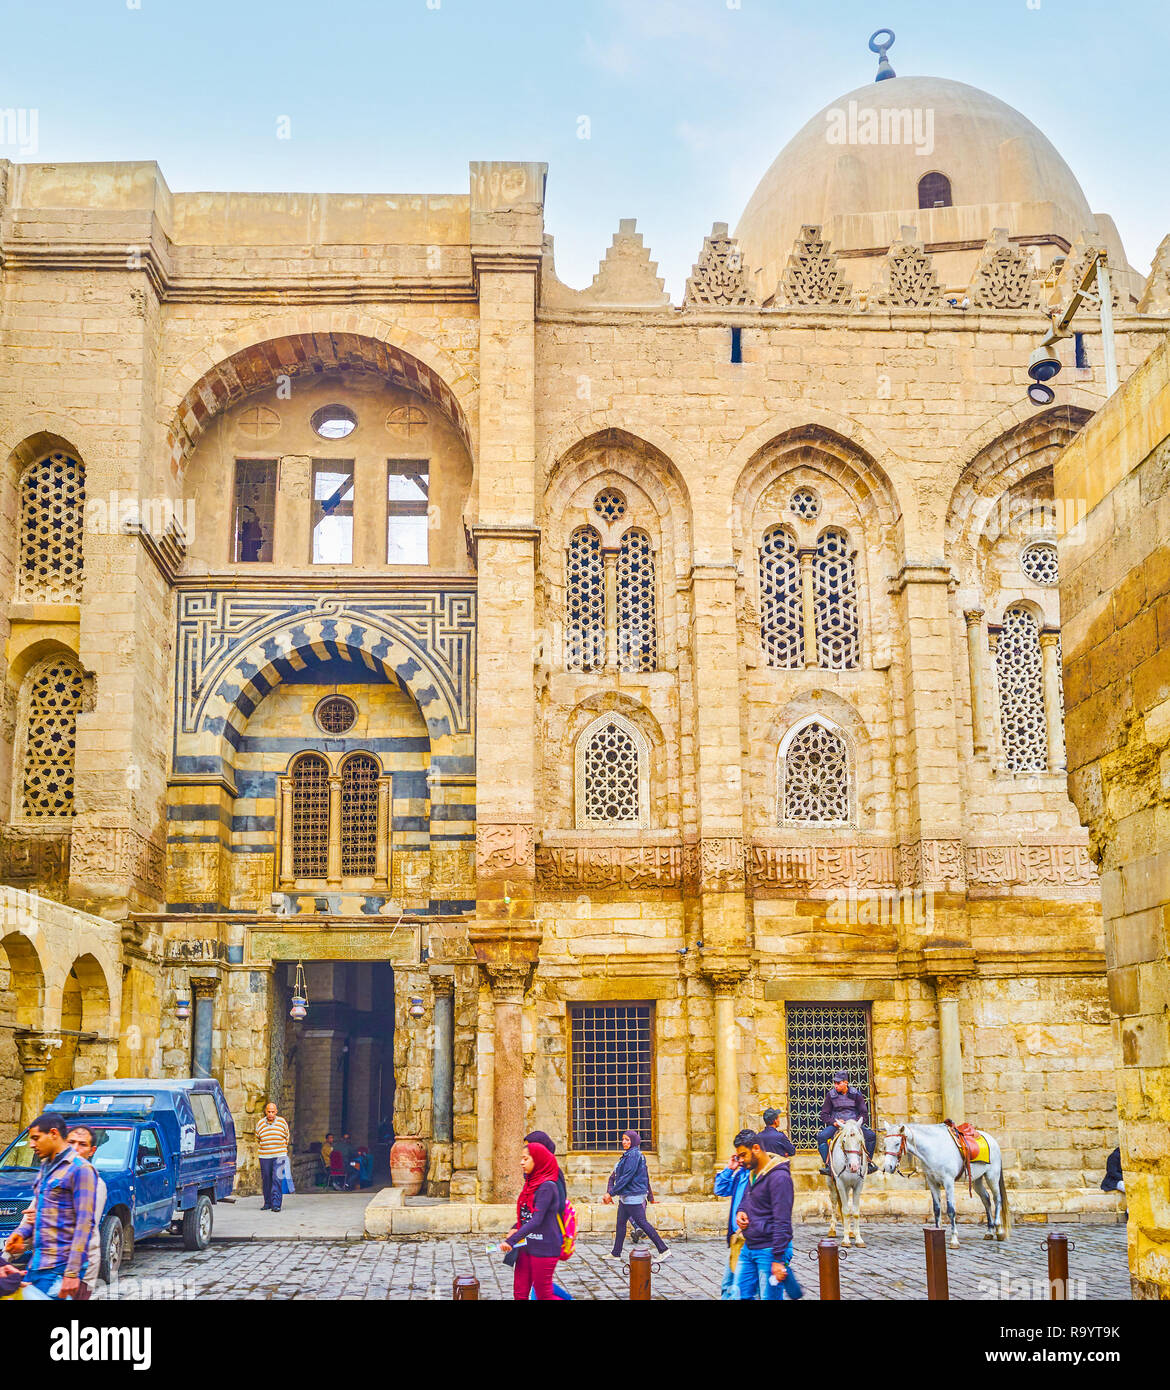 CAIRO, EGYPT - DECEMBER 20, 2017: Qalawun complex with beautiful arabic carvings and patterns located in the heart of Cairo and always secured and pat Stock Photo